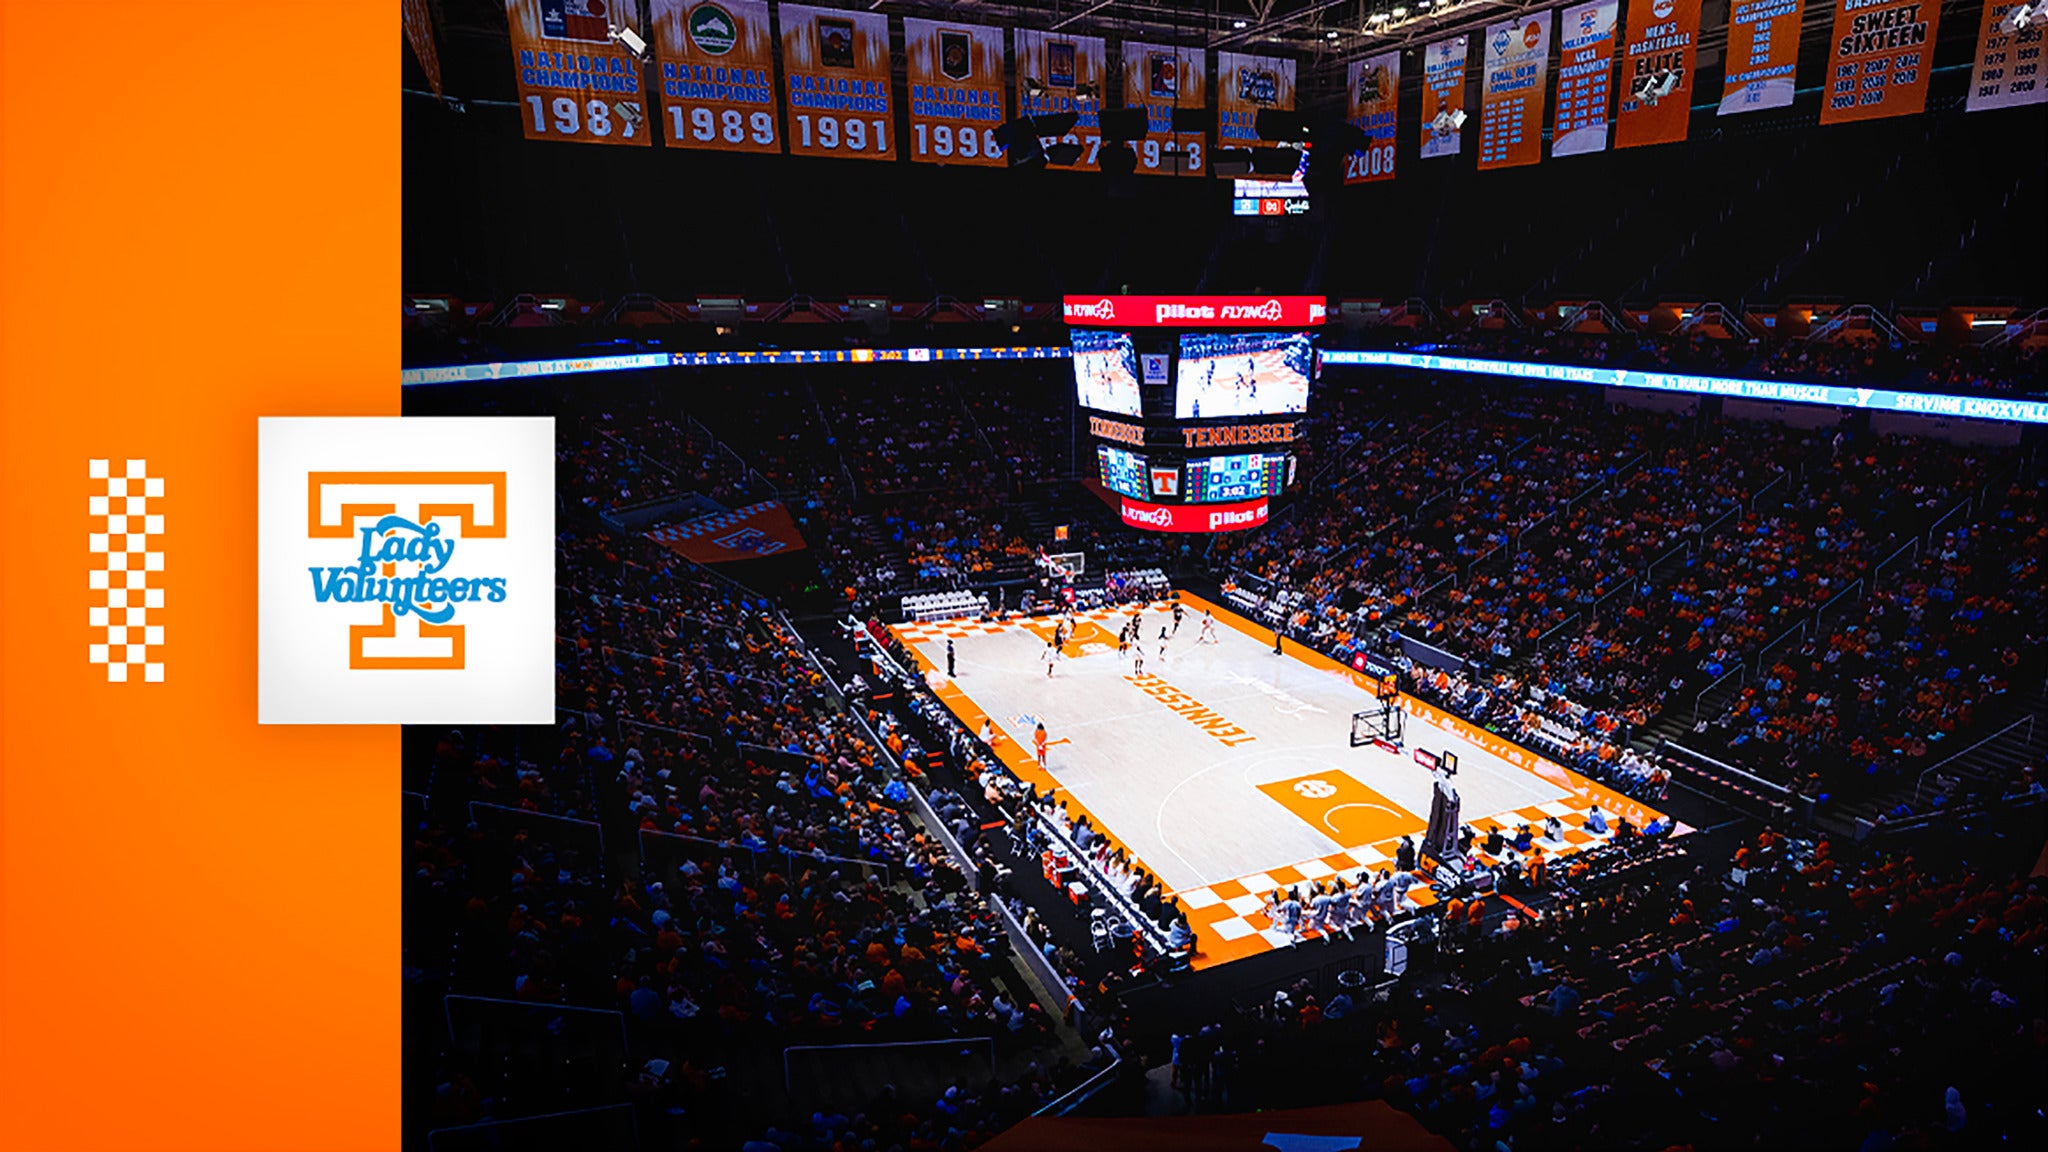 Tennessee Lady Volunteers Women's Basketball vs. Memphis Tigers Womens Basketball in Knoxville promo photo for Tennessee Fund Donor presale offer code